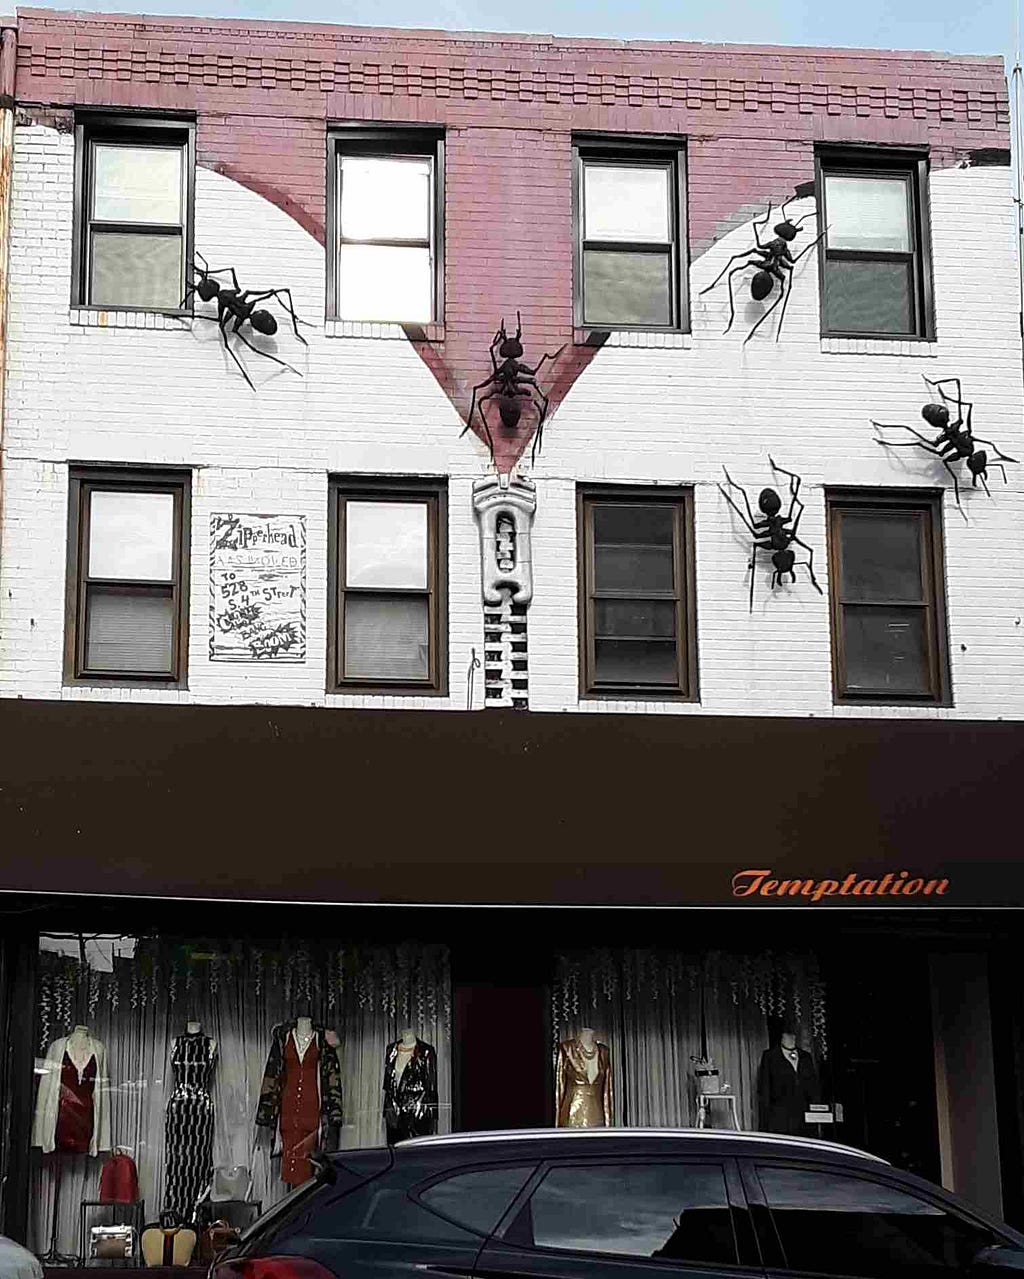 A building with a clothing store on the first floor and giant plastic ants crawling up the wall above it. The bricks are painted to look like an open zipper.